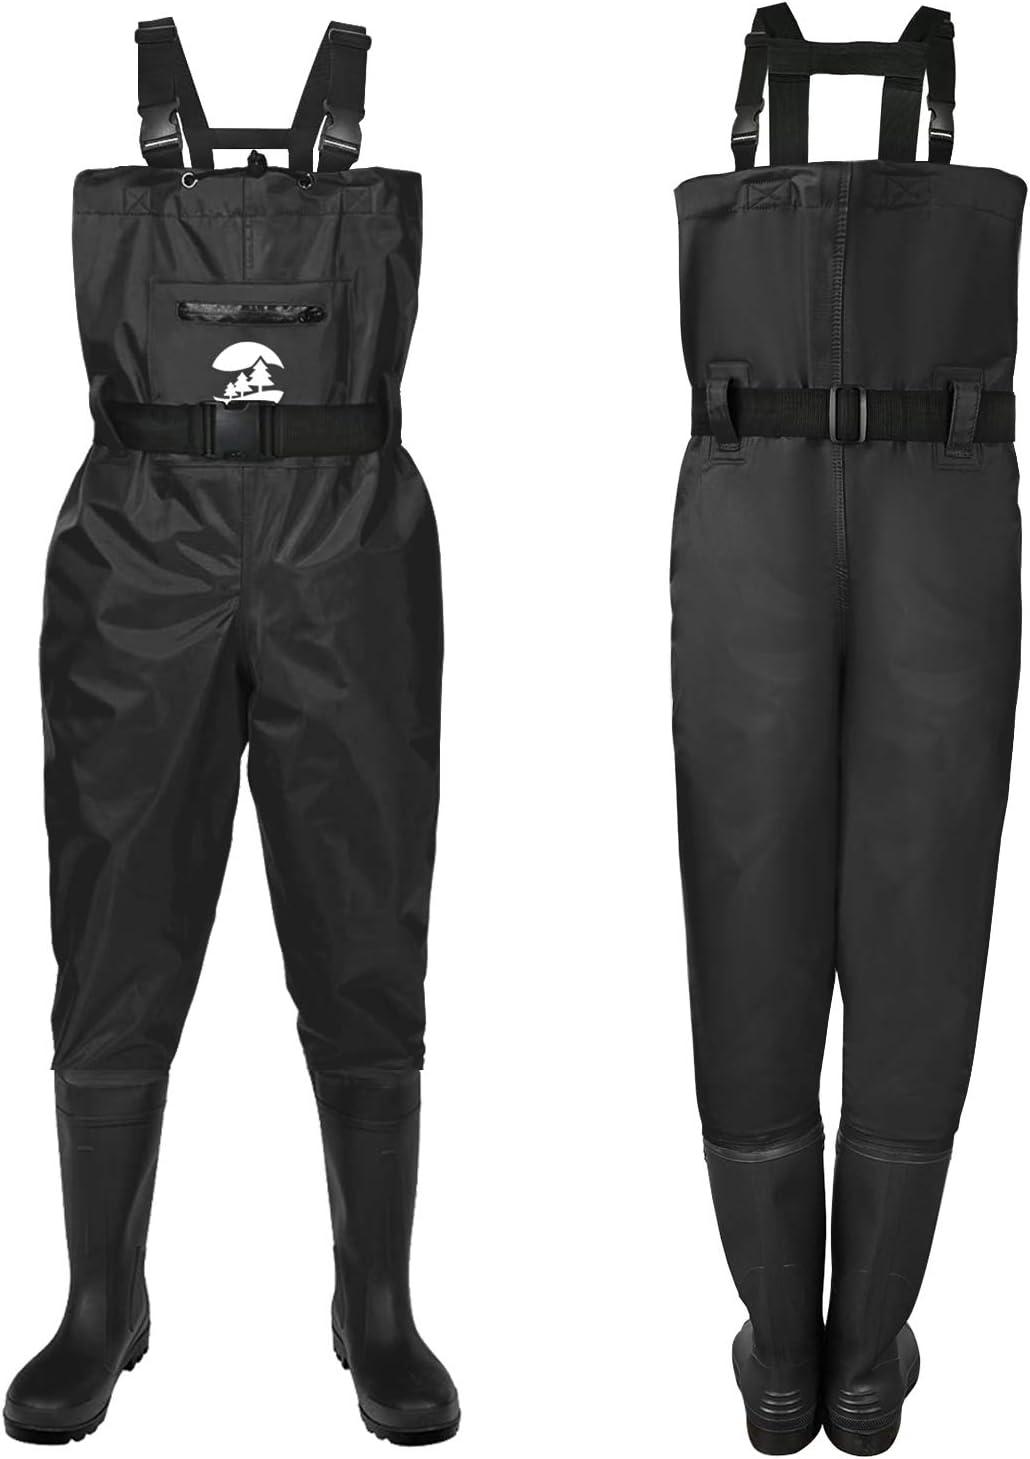 PVC Fishing Waders and Boots Large Size 10 - 12